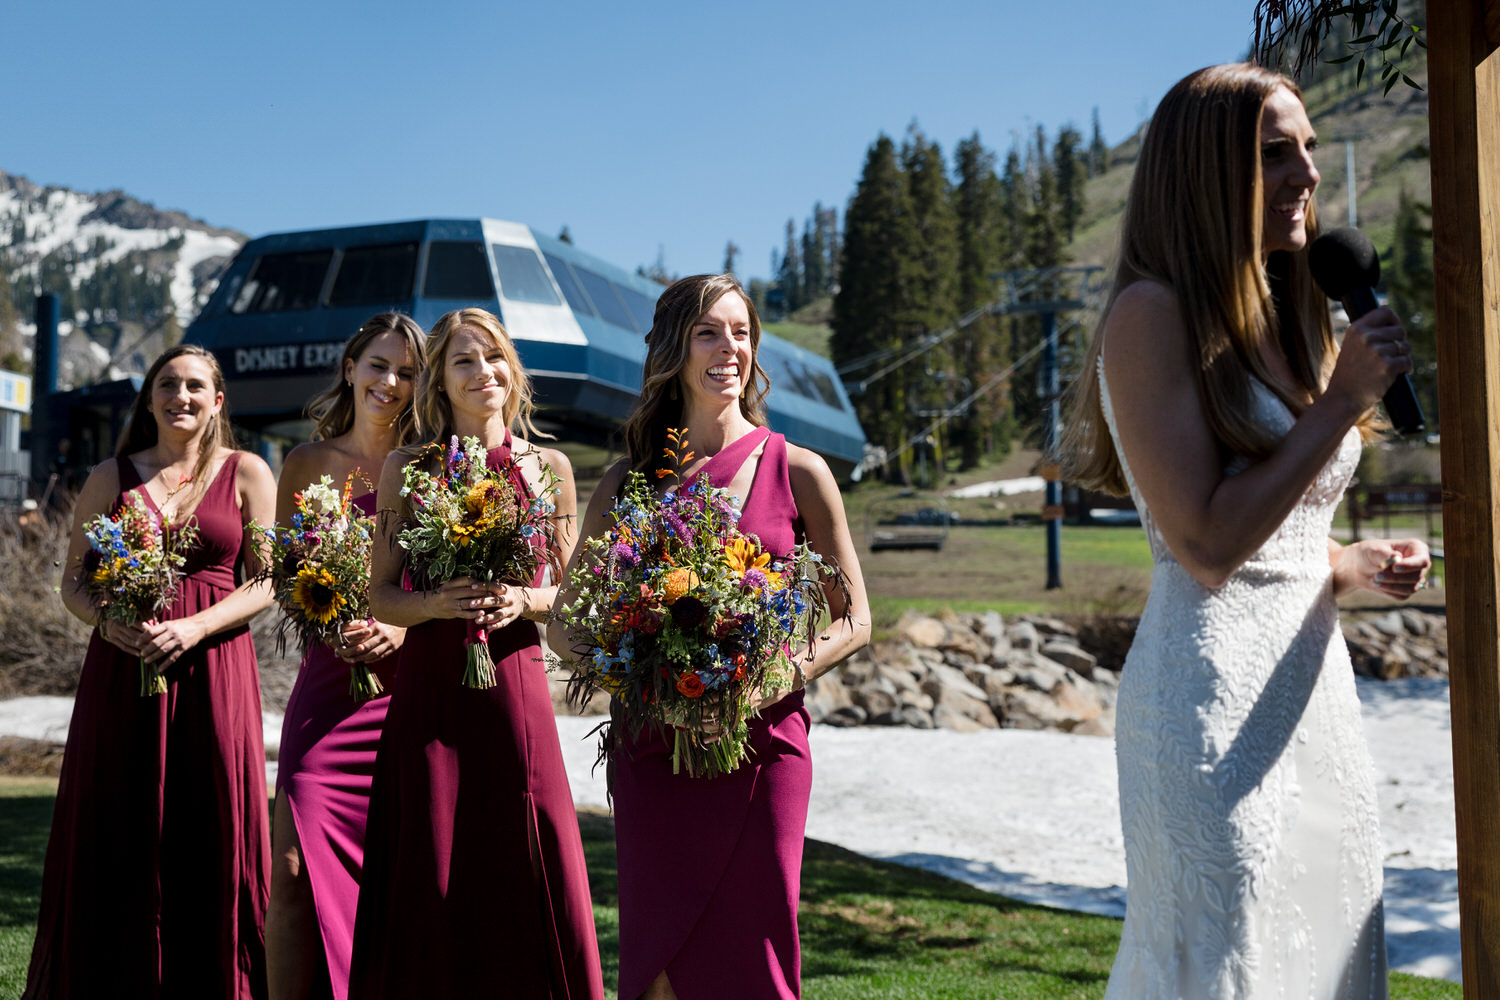 Maroon bridesmaid dresses and colorful floral bouquets during a wedding ceremony next to Disney Express chairlift.